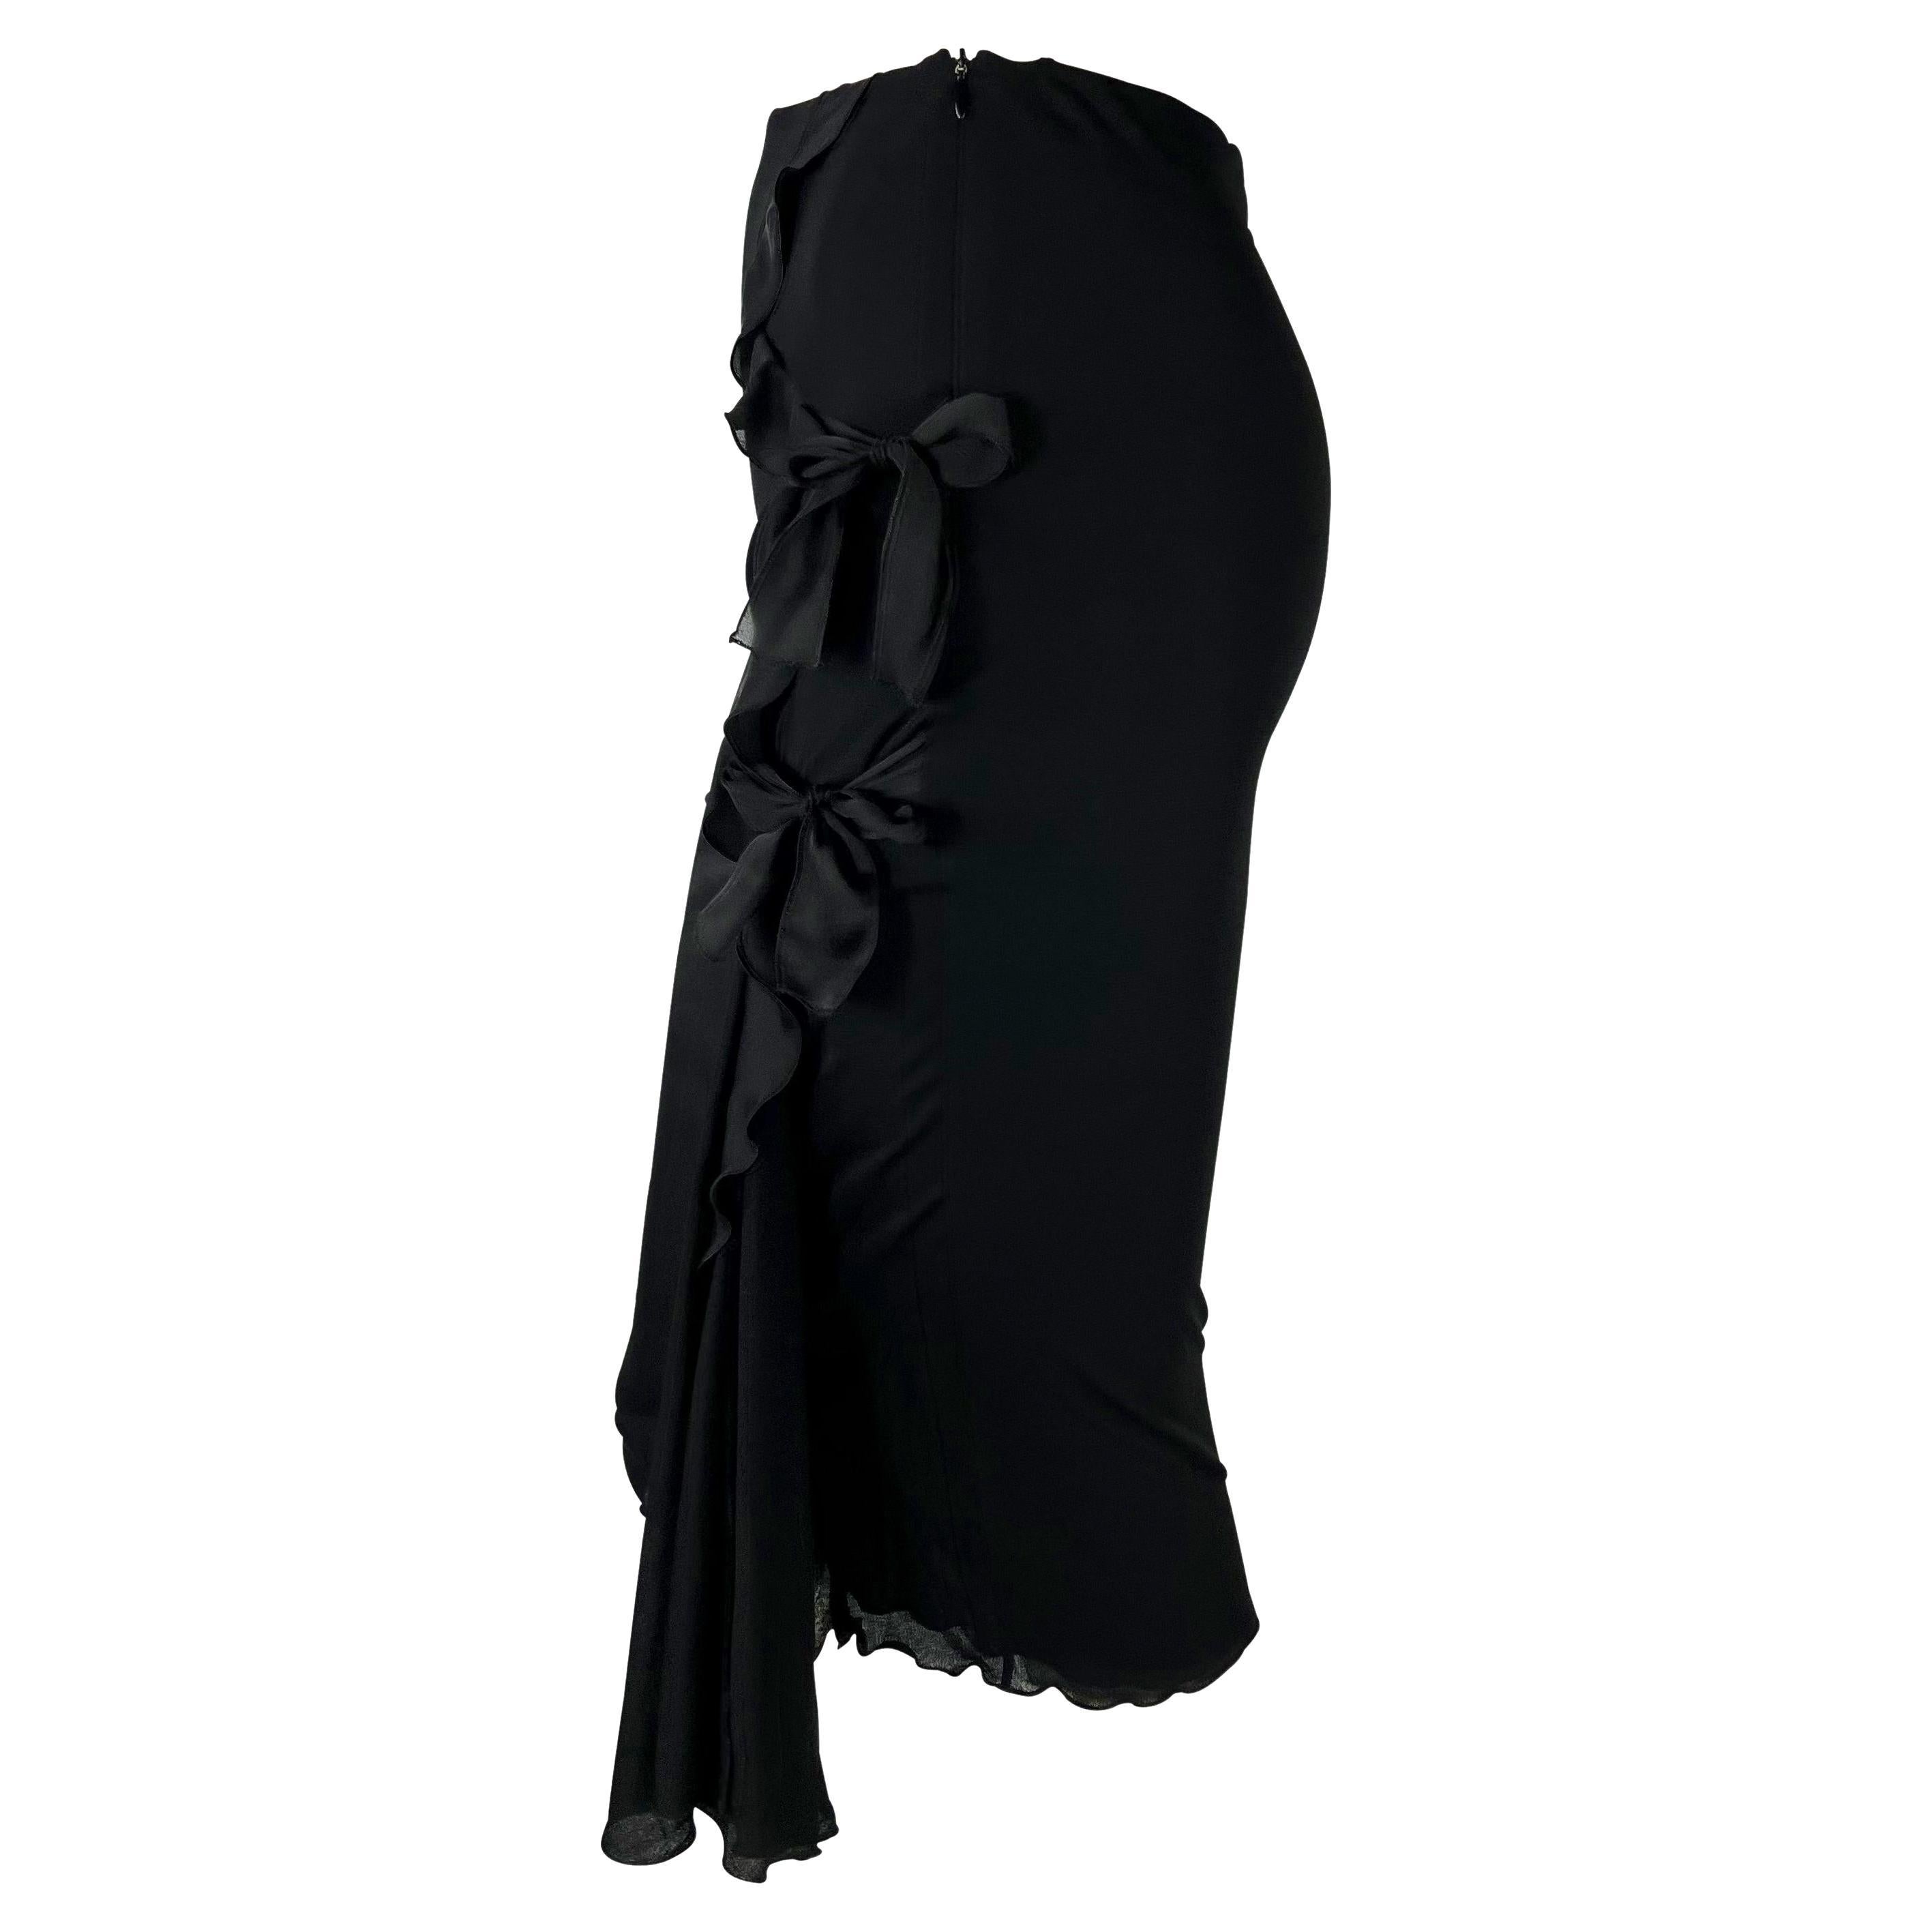 Presenting a stunning black ruffle Yves Saint Laurent Rive Gauche skirt, designed by Tom Ford. From the Fall/Winter 2002 collection, this fabulous form-fitting skirt features ruffles that cascade down one side and is made complete with two bows. Add